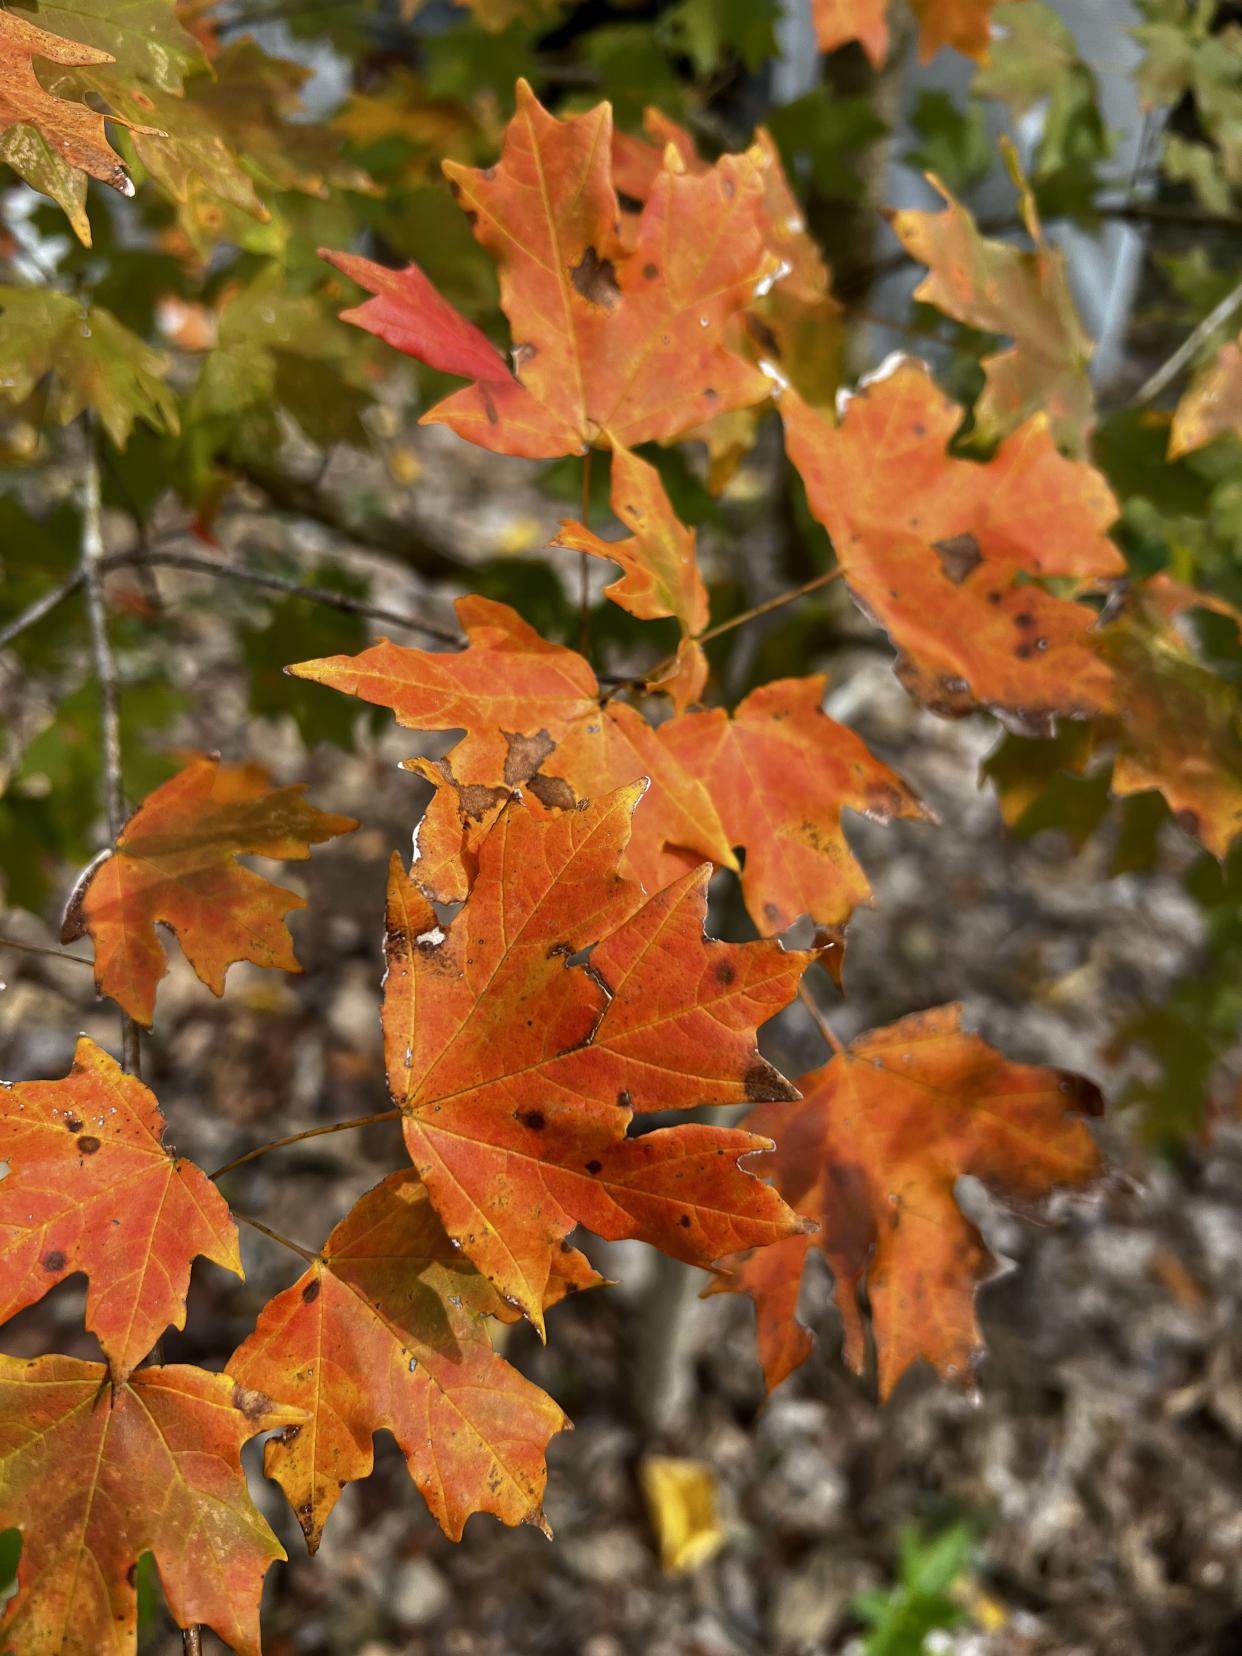 Endemic to the Panhandle, the Florida sugar maple distinguishes itself with peachy yellow to orange-red foliage, offering a local touch to the fall landscape, while its drought tolerance and suitability as a shade tree set it apart from the red maple.